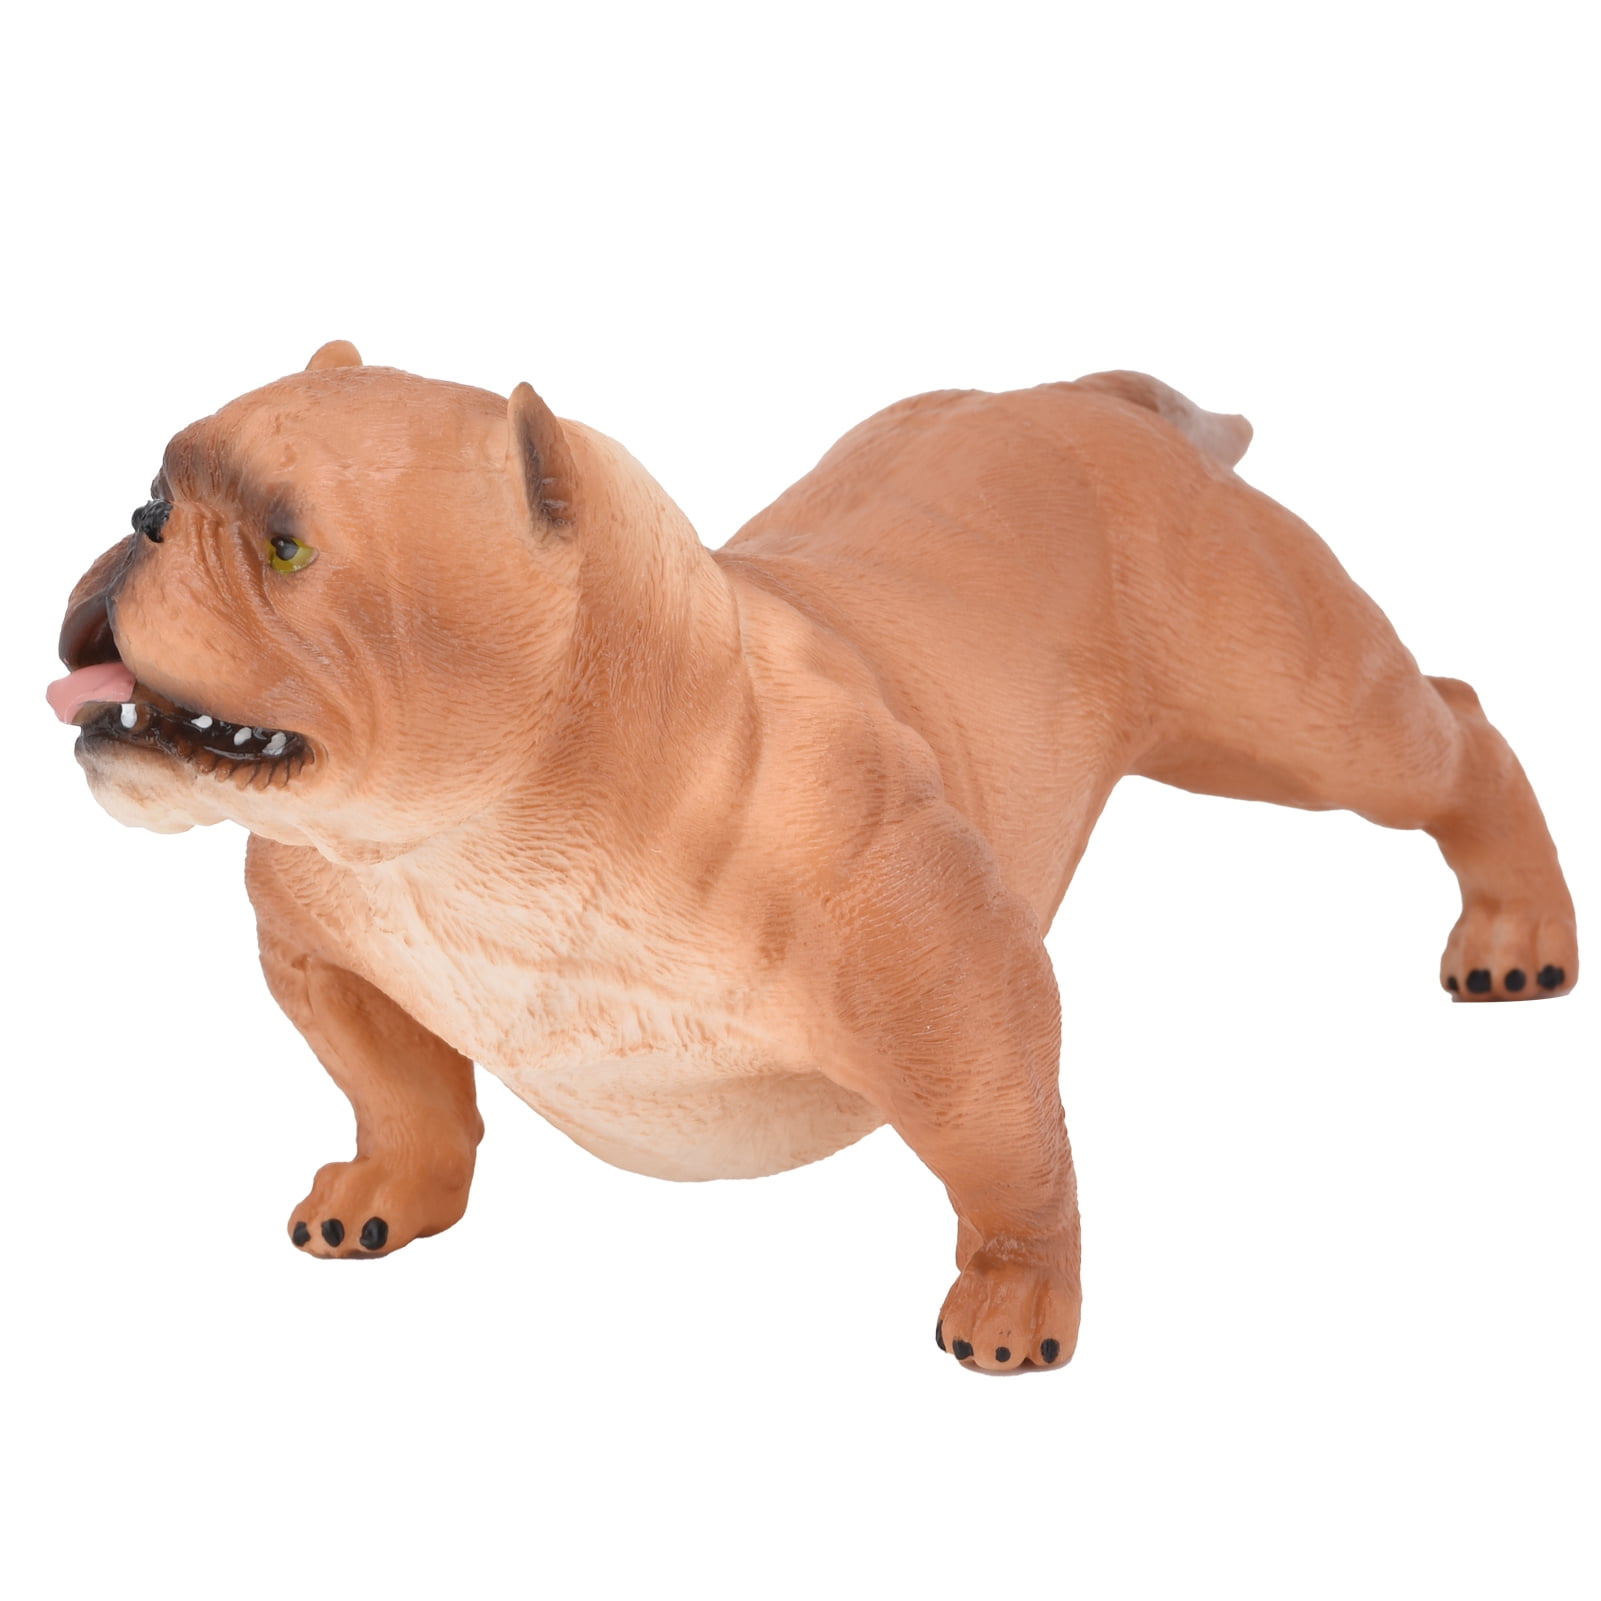 Porfeet Model Toy Simulated Collectible Plastic Simulation Wild Animal Bully  Pitbull Model for Hobby Collection,E 